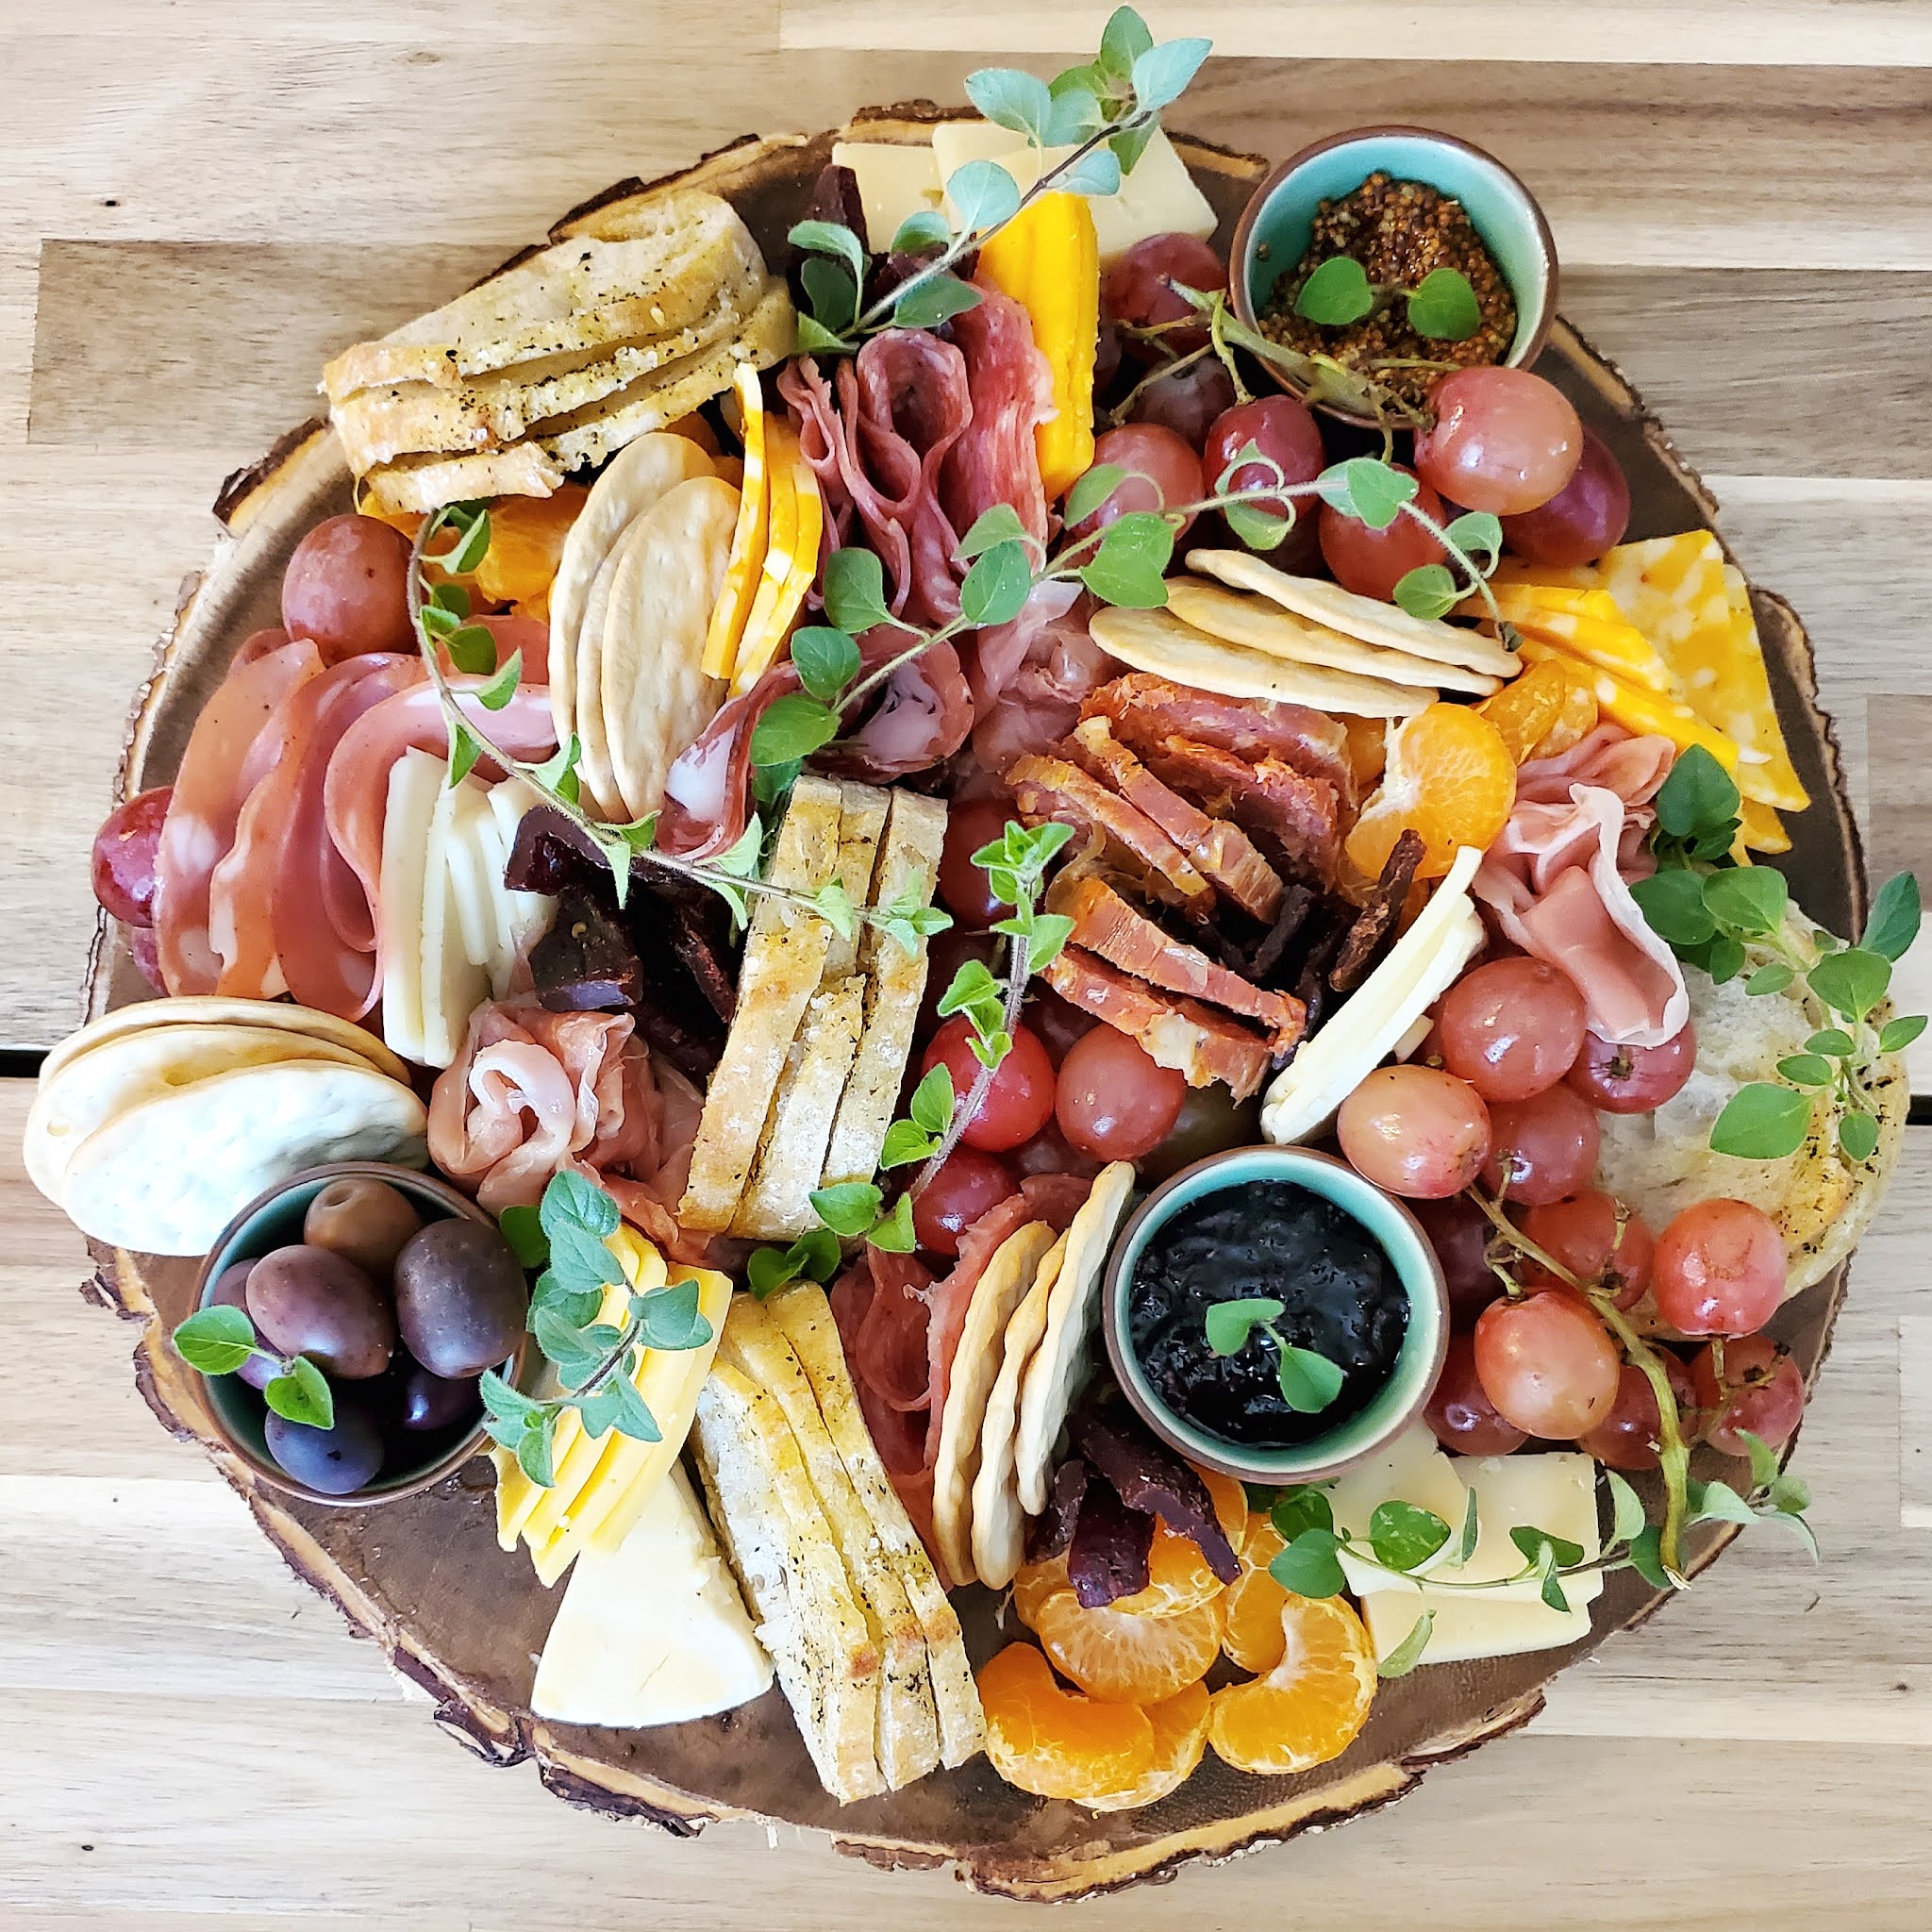 How to Make a Charcuterie Board in 10 Minutes - My Fair Hostess